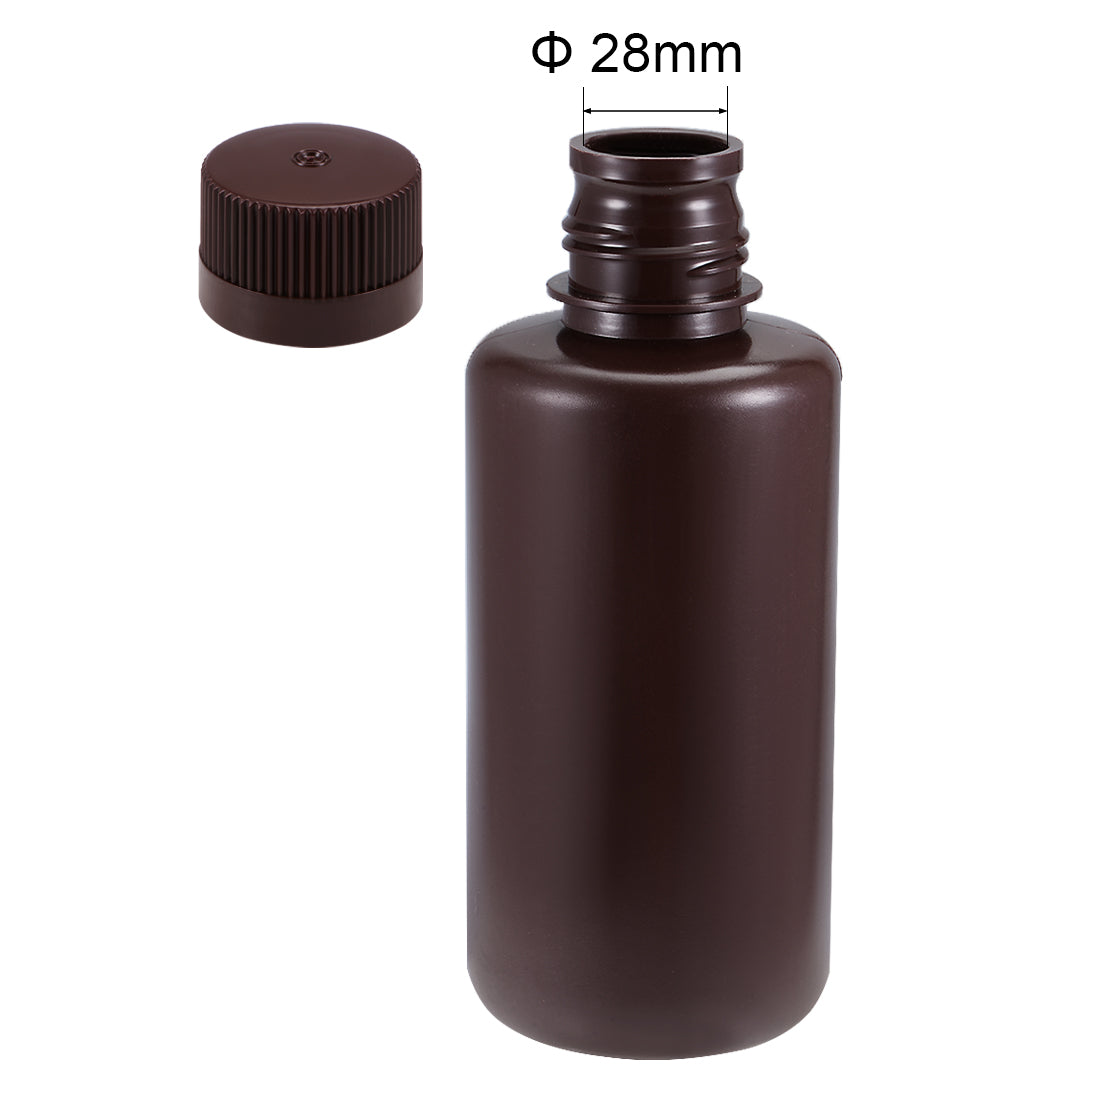 uxcell Uxcell Plastic Lab Chemical Reagent Bottle 500ml/16.9oz Small Mouth Sample Sealing Liquid Storage Container Brown 2pcs